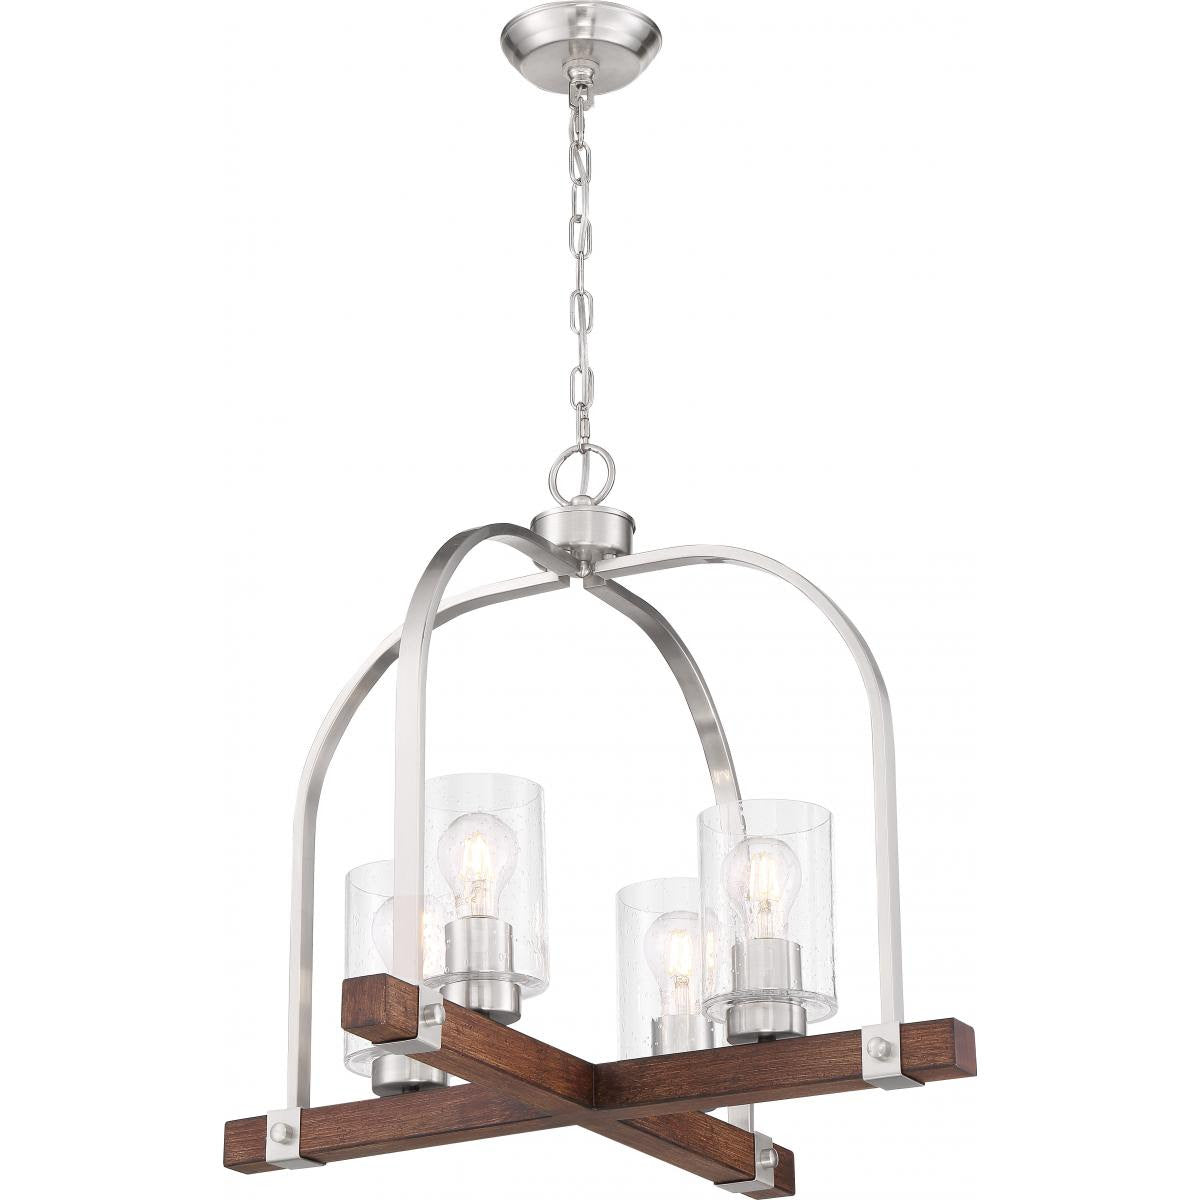 Nuvo AARABEL 4 LIGHT CHANDELIER with Clear Seeded Glass - Brushed Nickel and Nutmeg Wood Finish